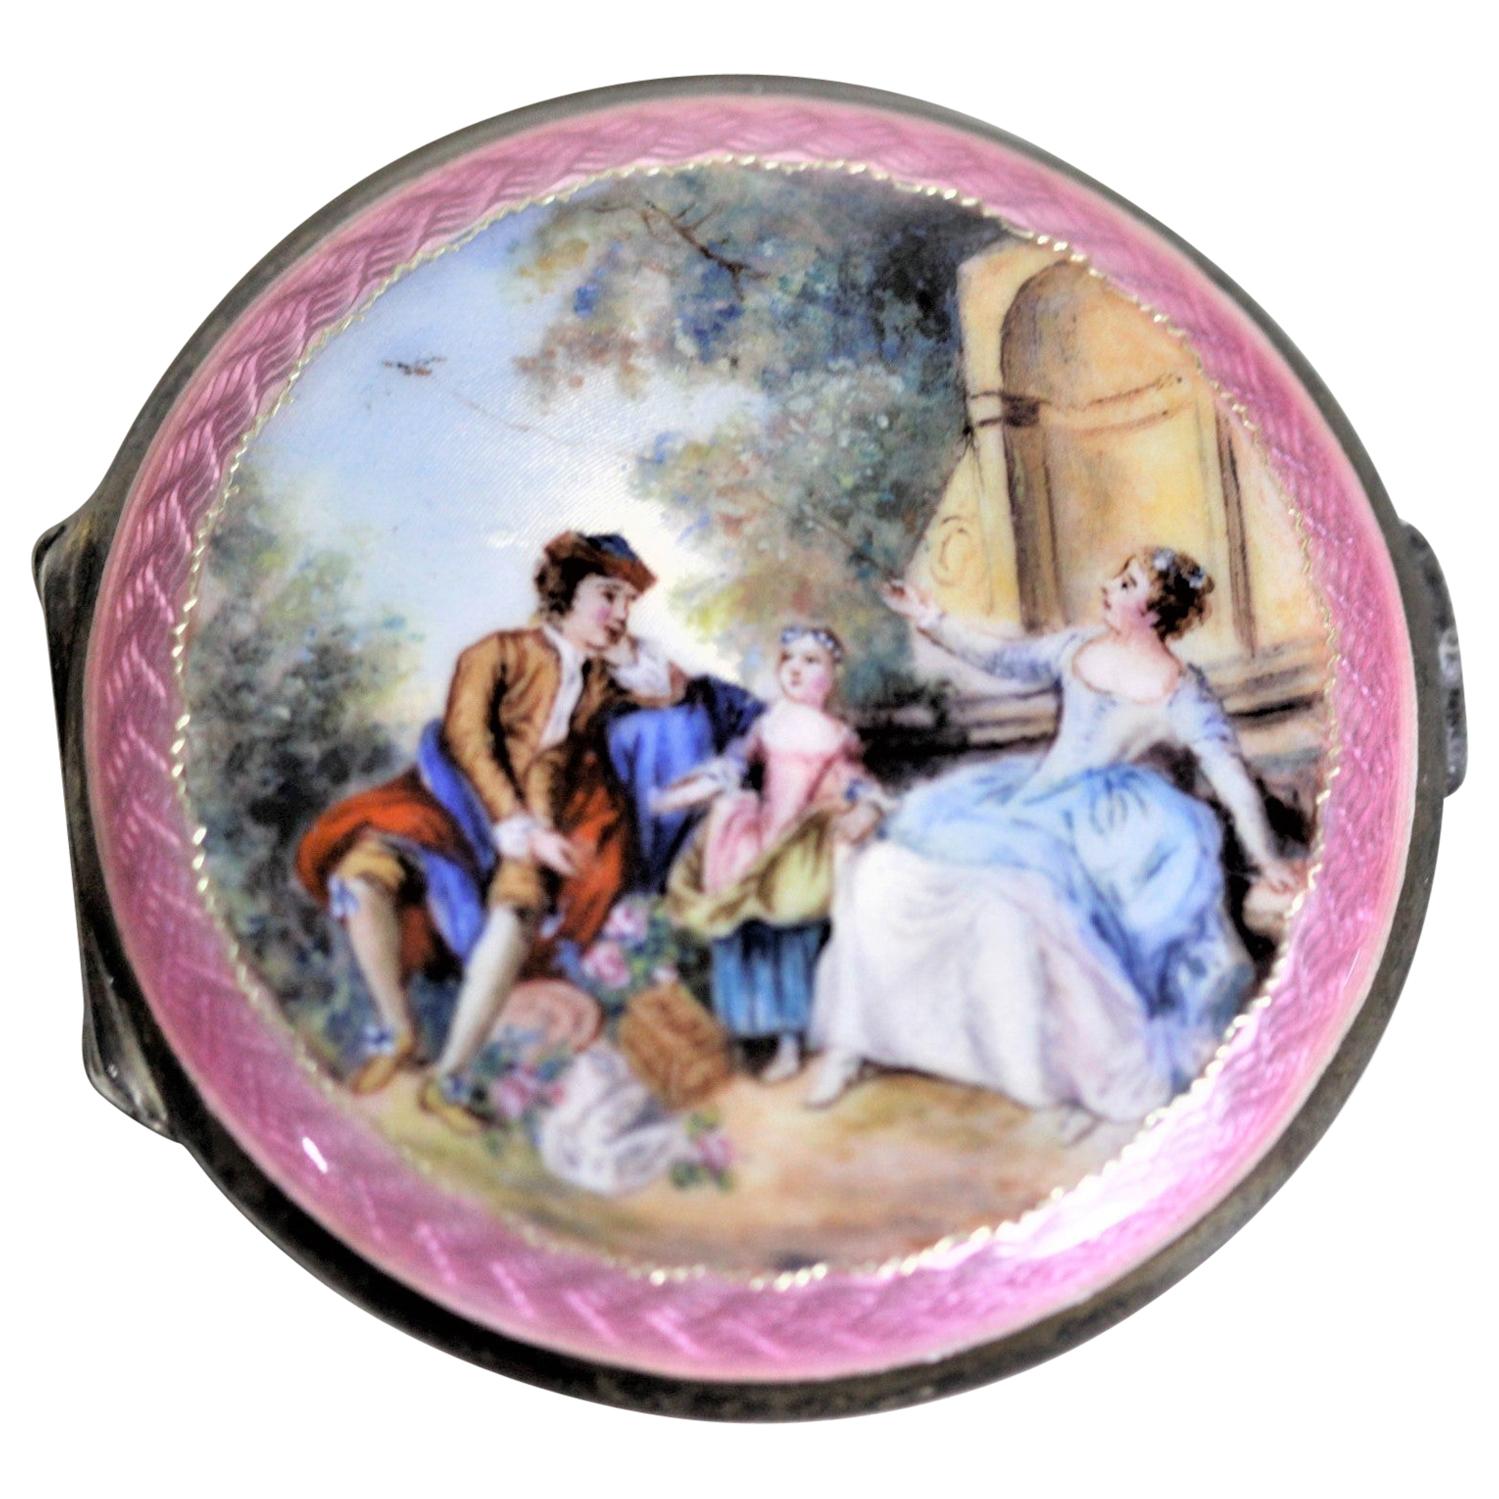 Birks Sterling Silver Ladies Compact with Enamel Portrait & Guilloche Decoration For Sale